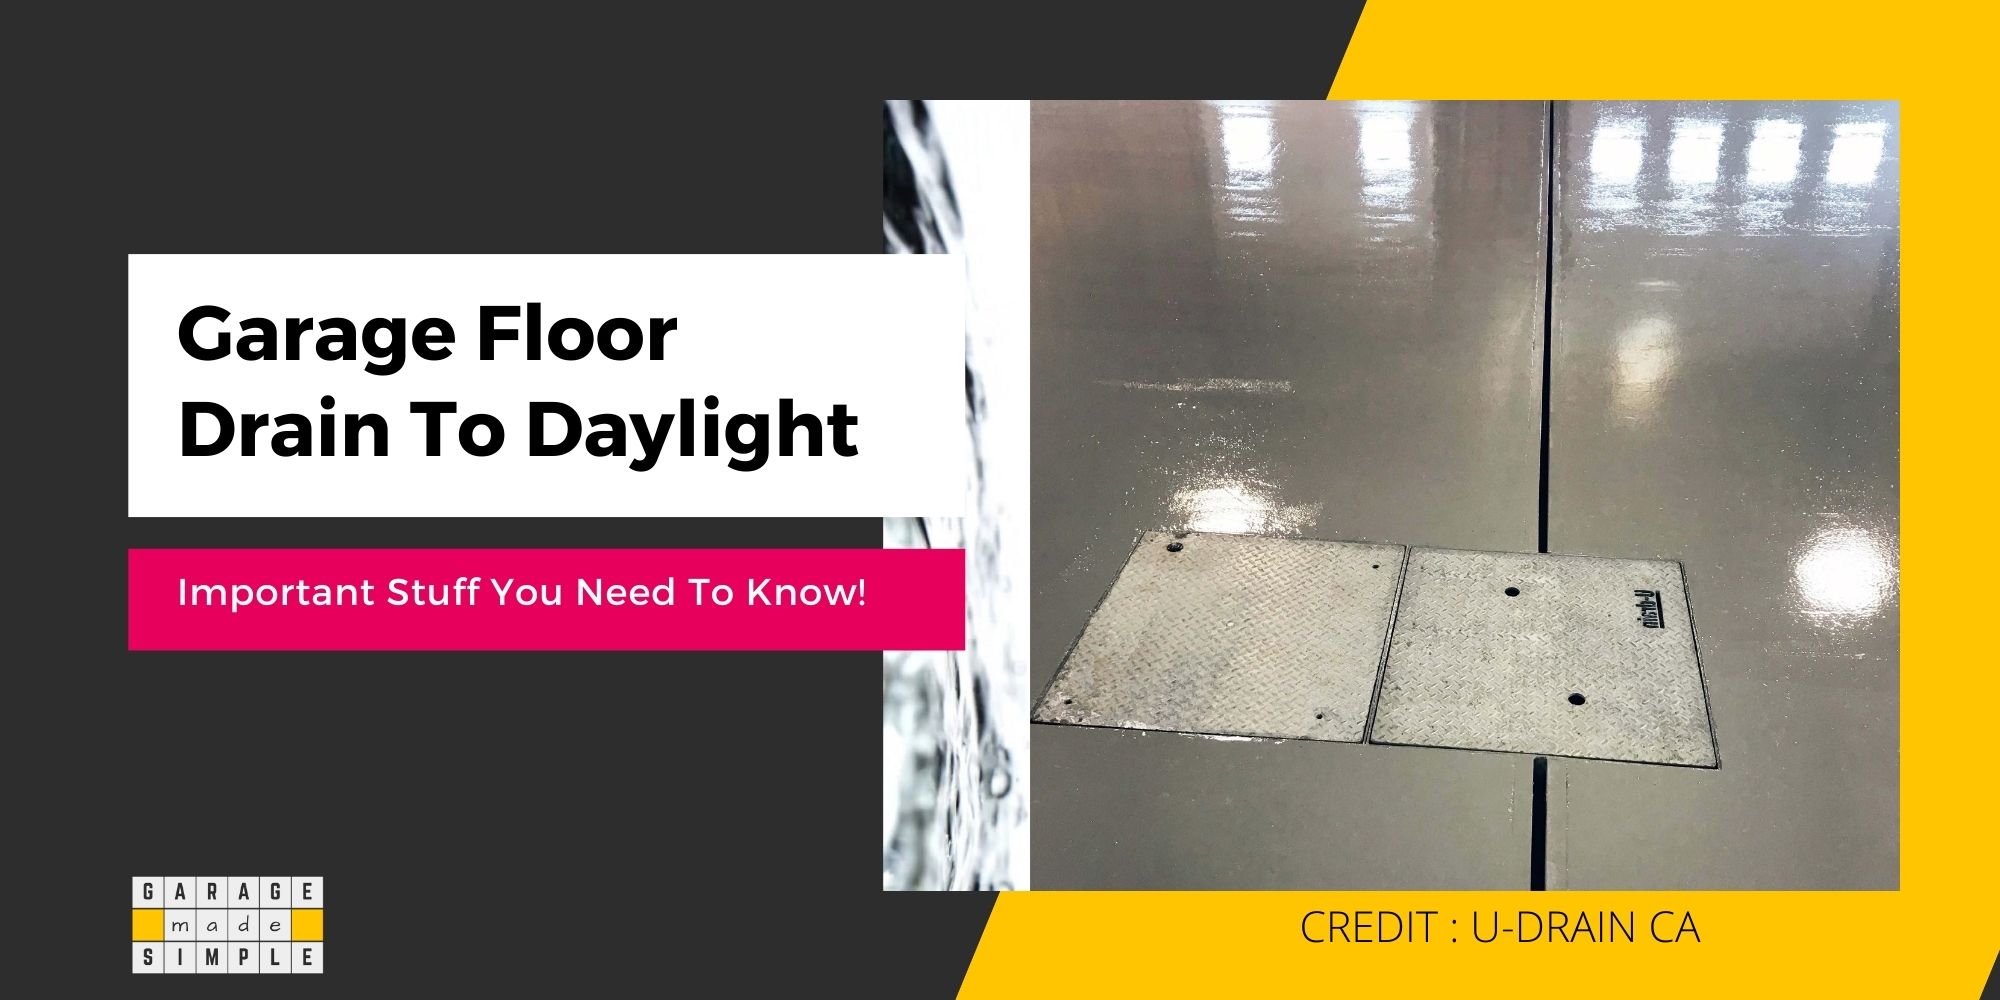 Garage Floor Drain To Daylight (Important Stuff You Need To Know!)